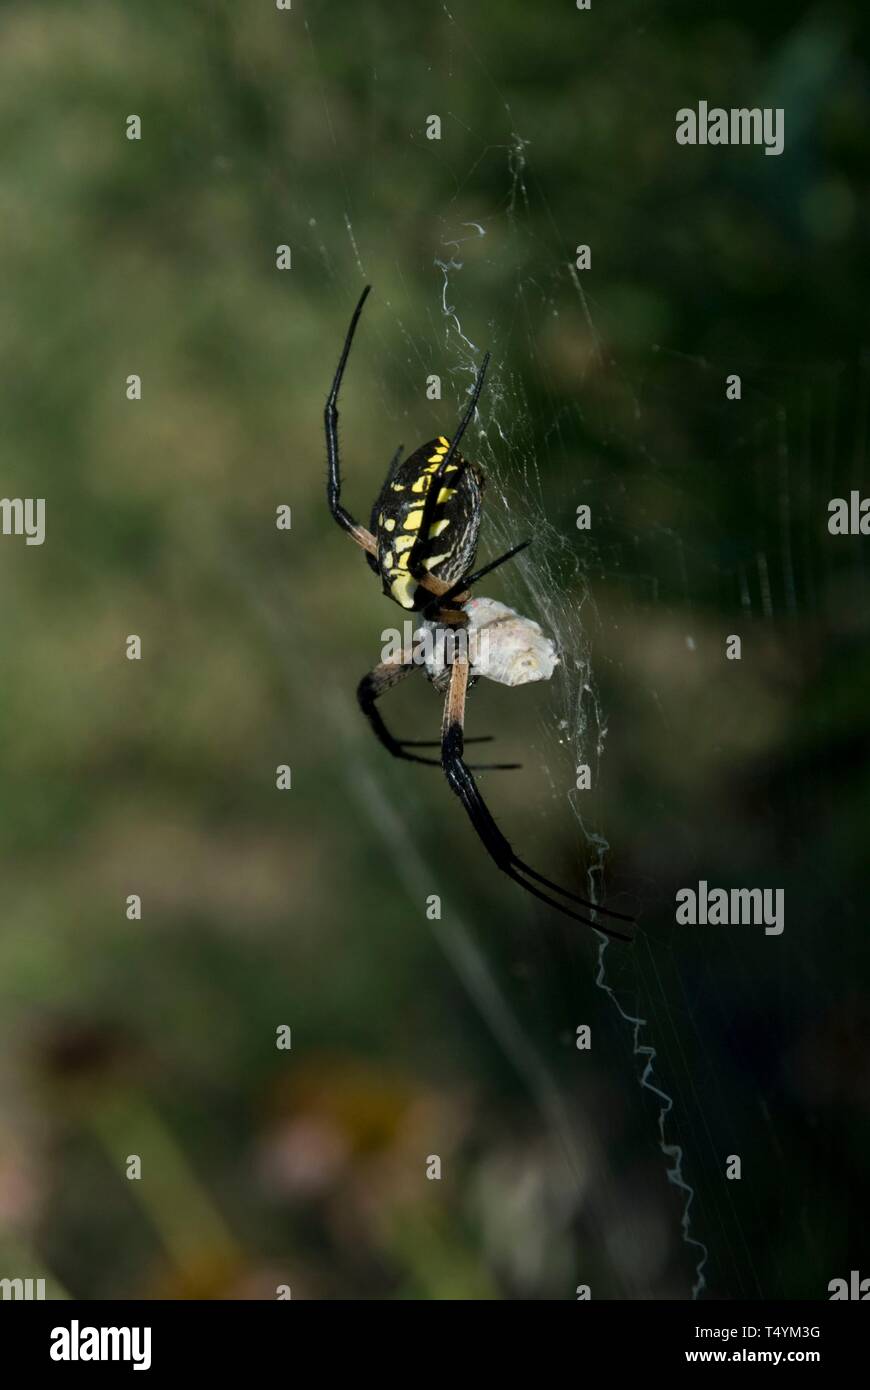 Black and Yellow Garden Spider, Argiope aurantia, Female with prey wrapped up, Leavenworth, Kansas. Stock Photo